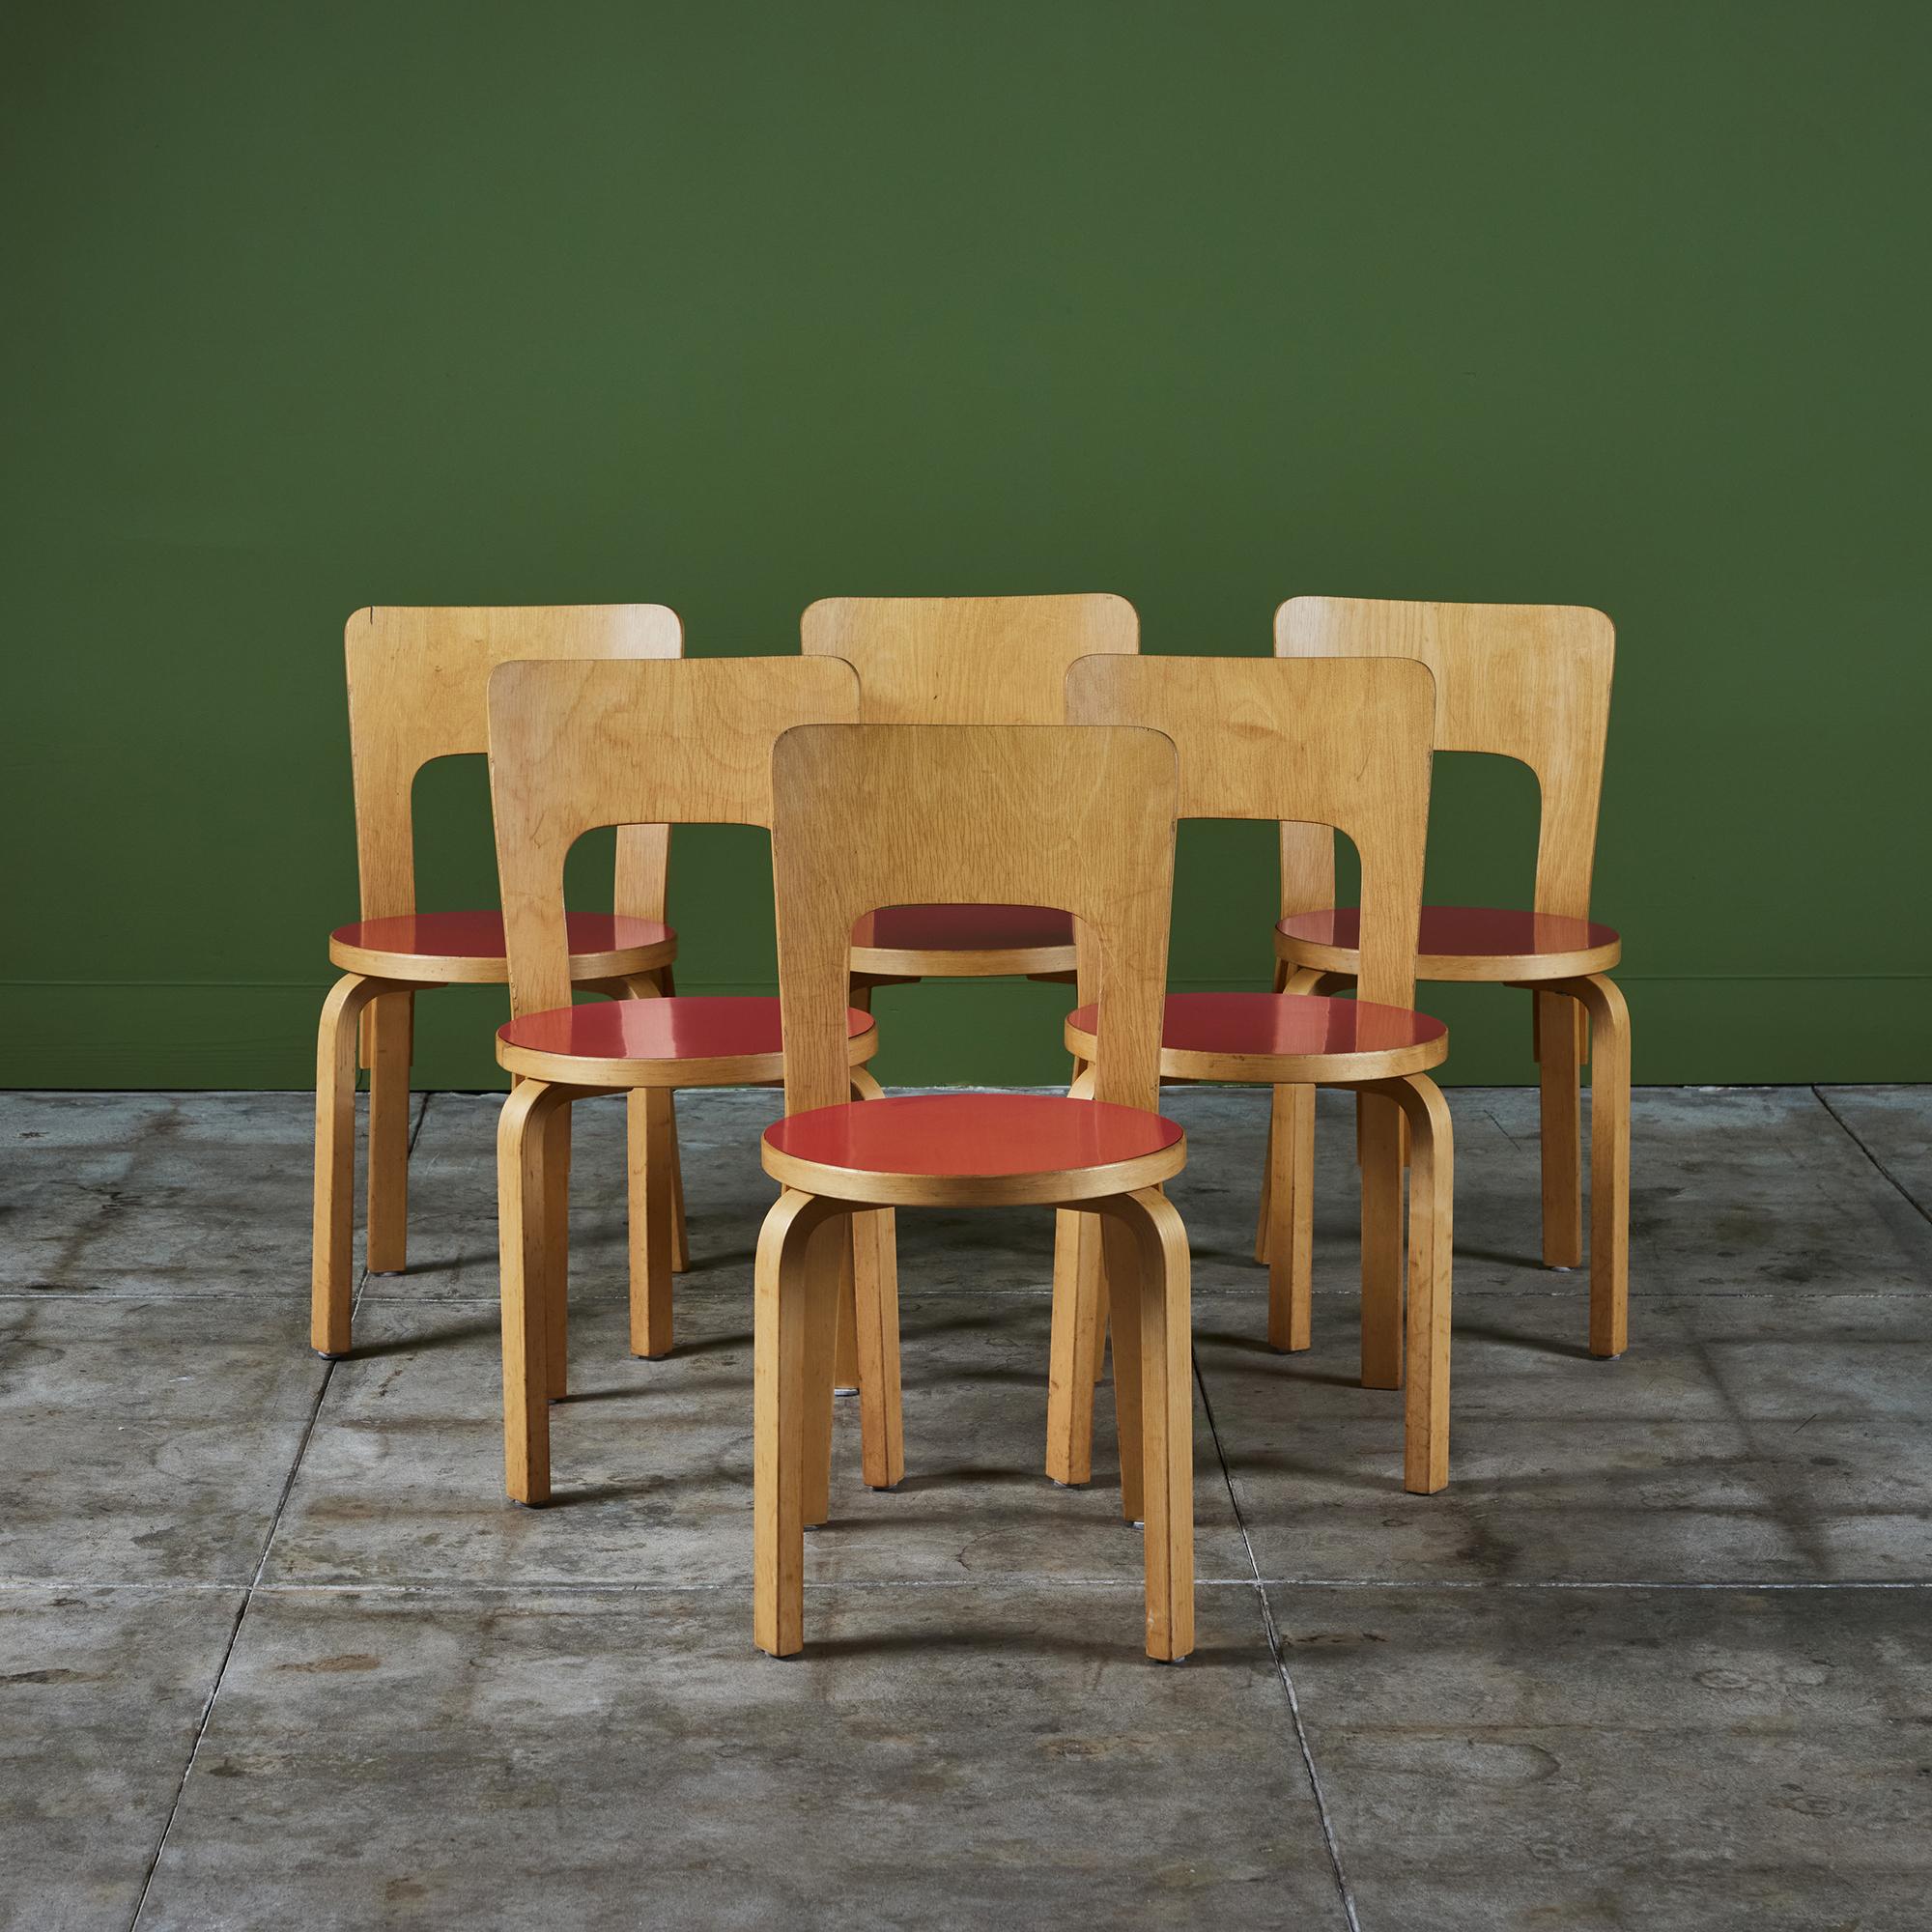 Artek’s Model 66 dining chair designed by Alvar Aalto and produced in the 1950's feature honey toned birch legs and a high bent plywood backrest. The seat is circular birch wood with a red laminate seat and bent birch wood legs in Aalto’s signature